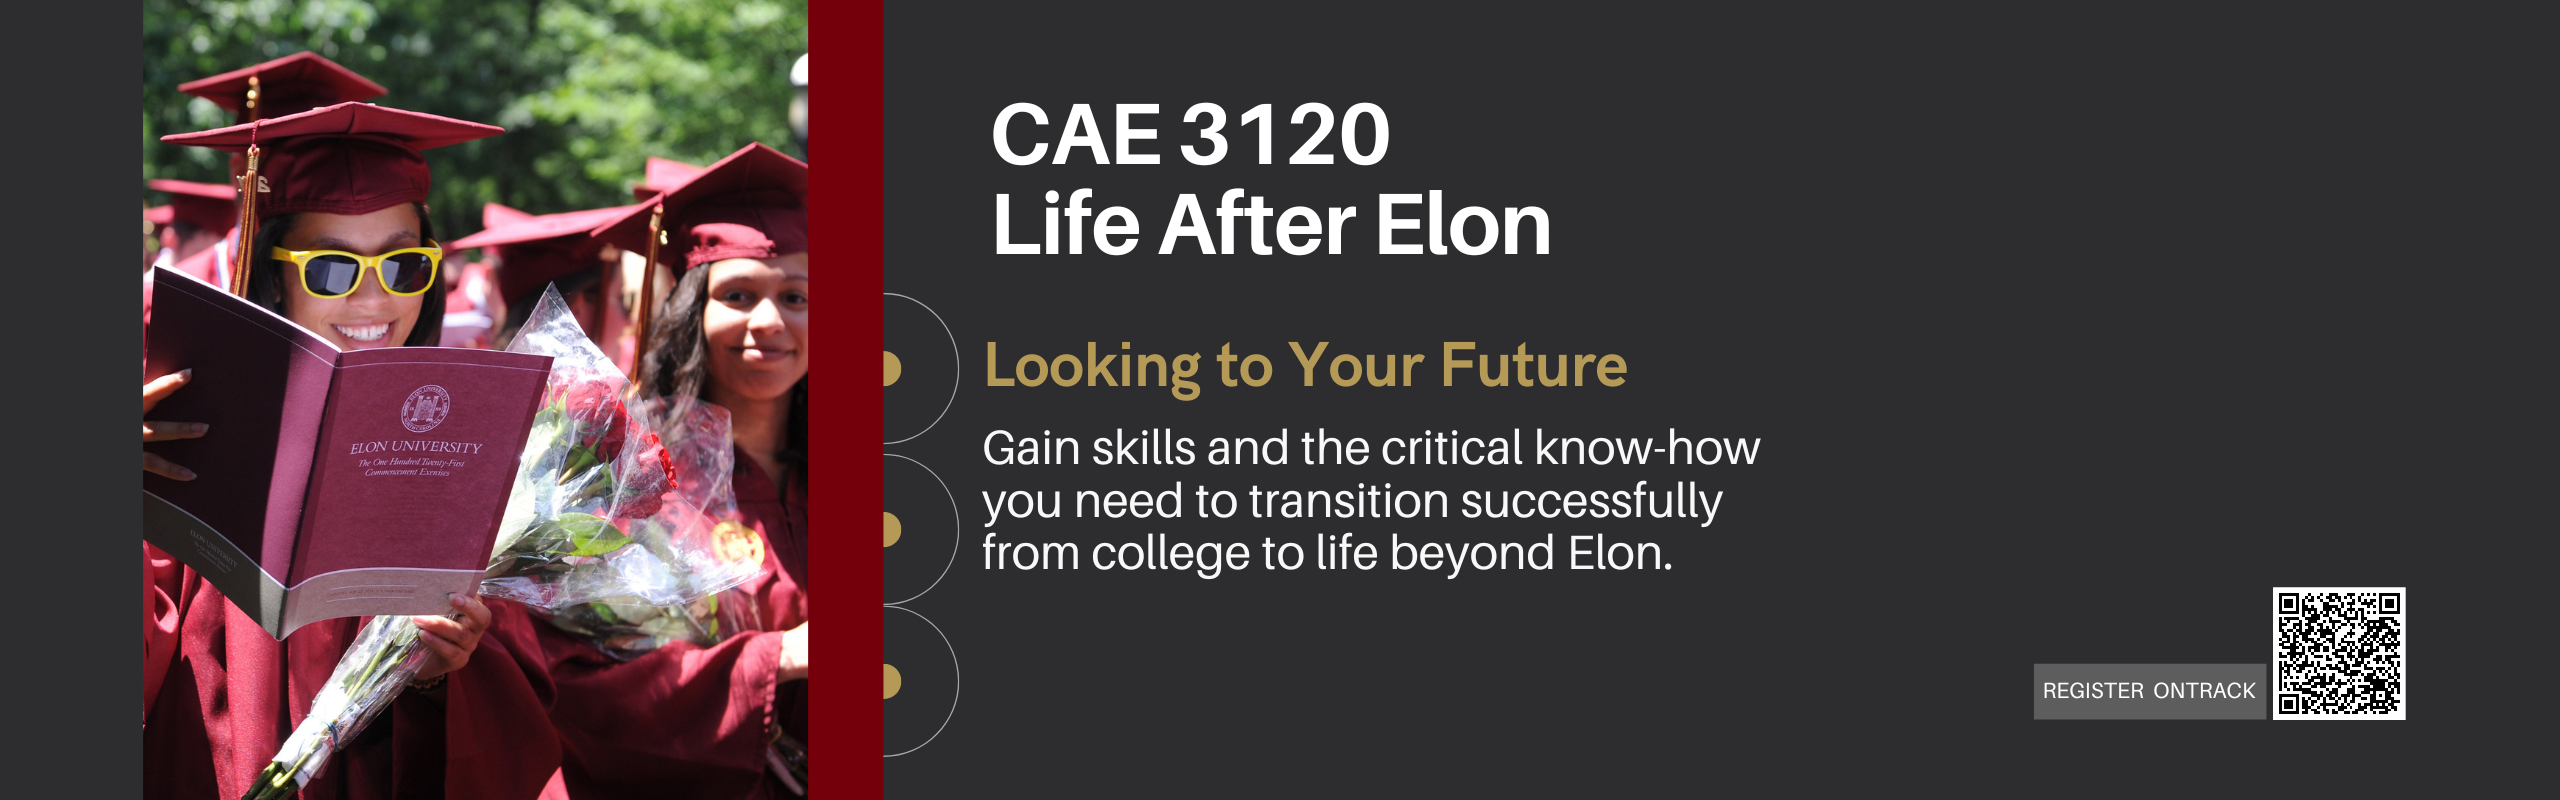 REGISTER FOR CAE COURSES 3120 ON TRACK